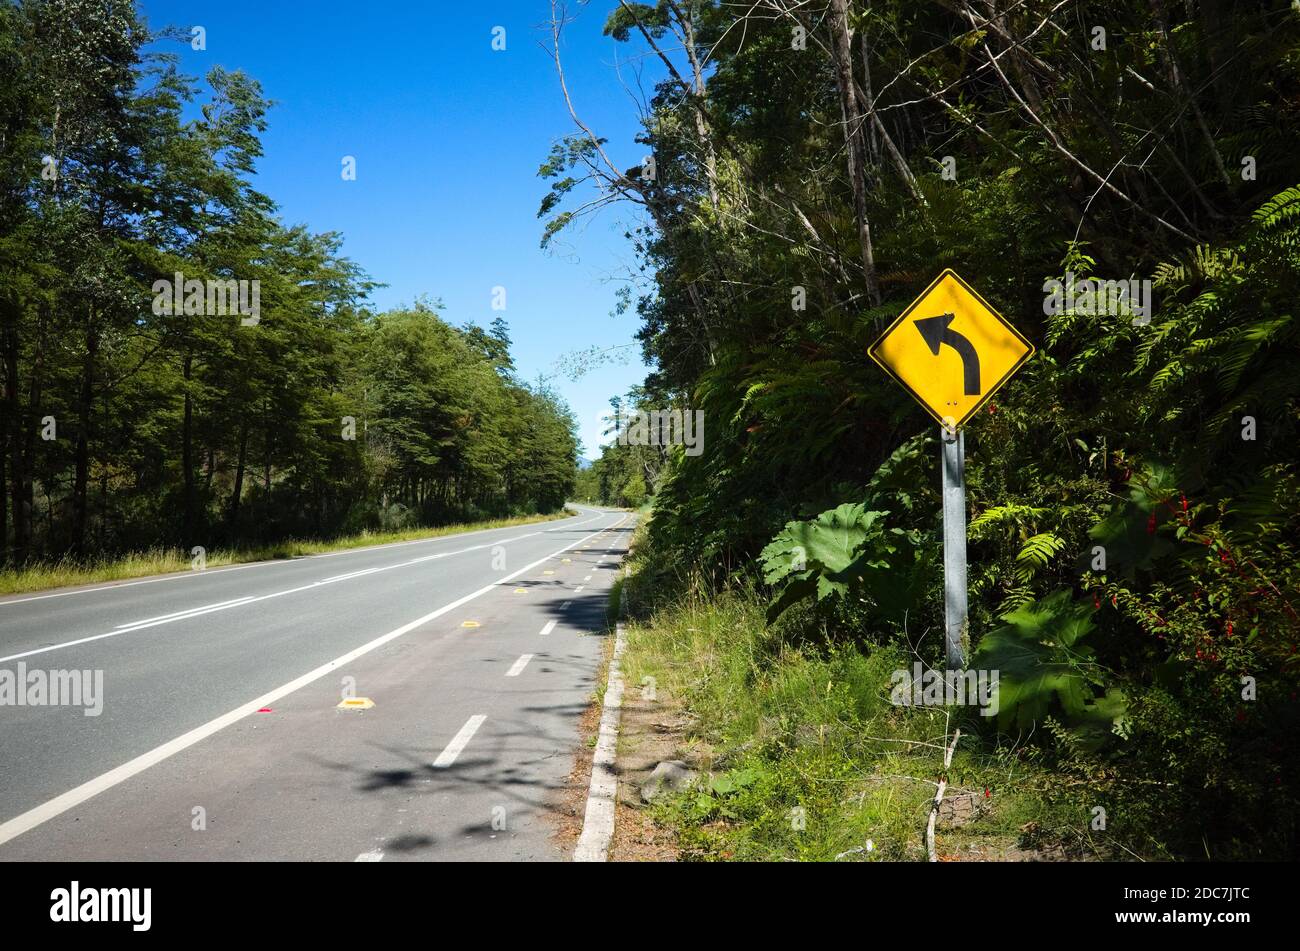 Turn right road sign along the empty highway road in Chile. Warning road sign with black arrow on yellow background along bicycle lane. Stock Photo